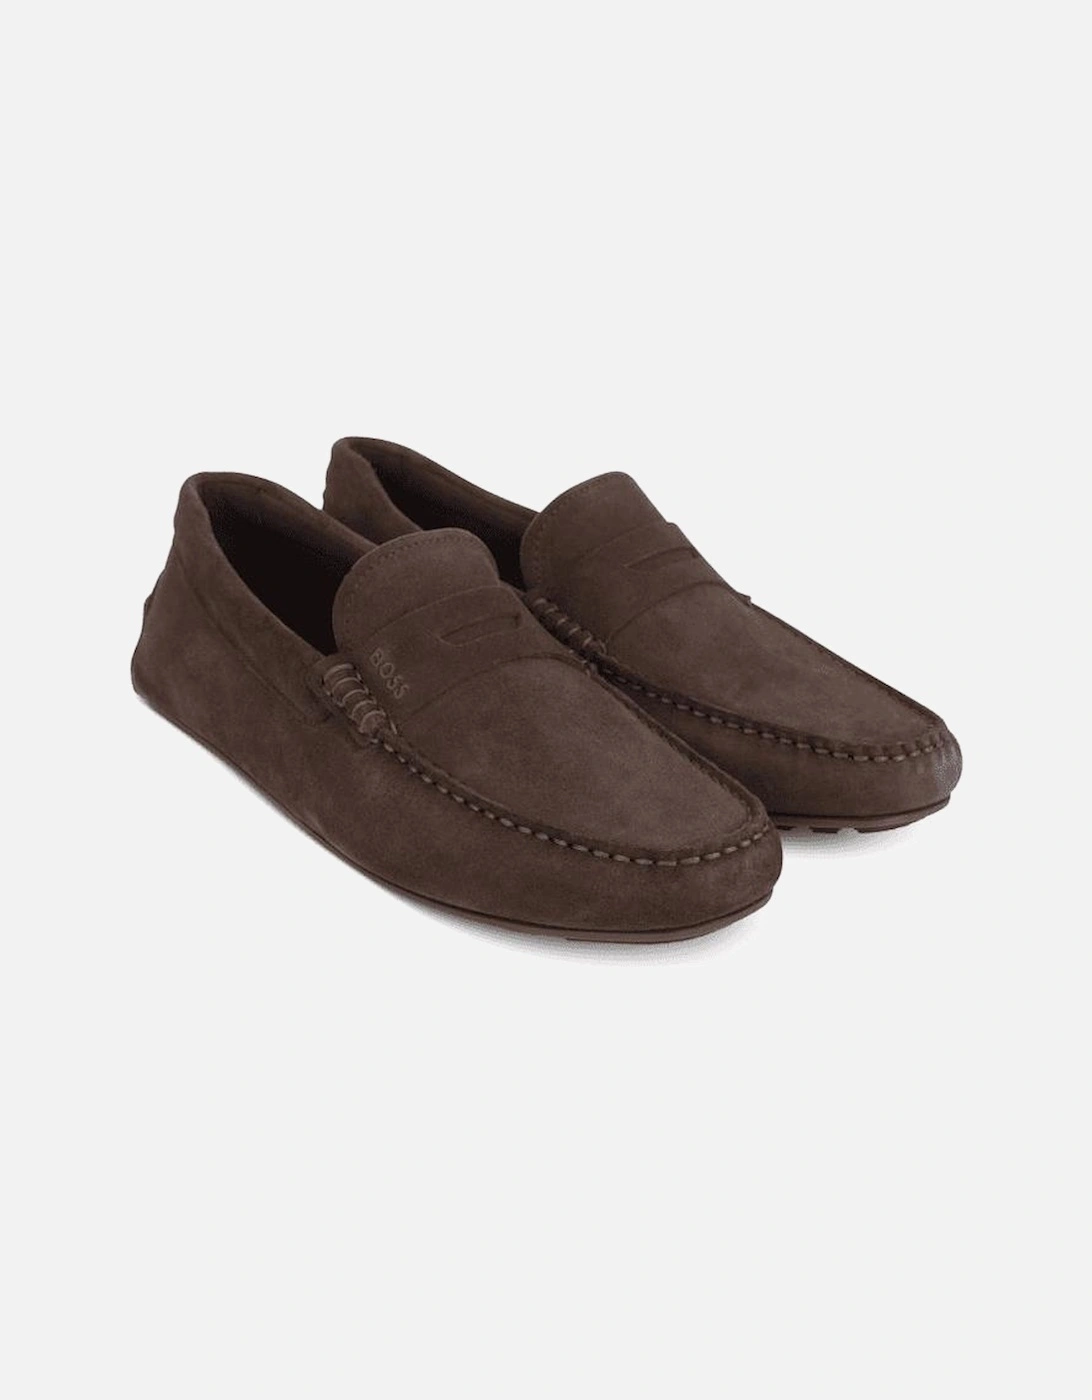 Moccasin Suede Brown Loafers